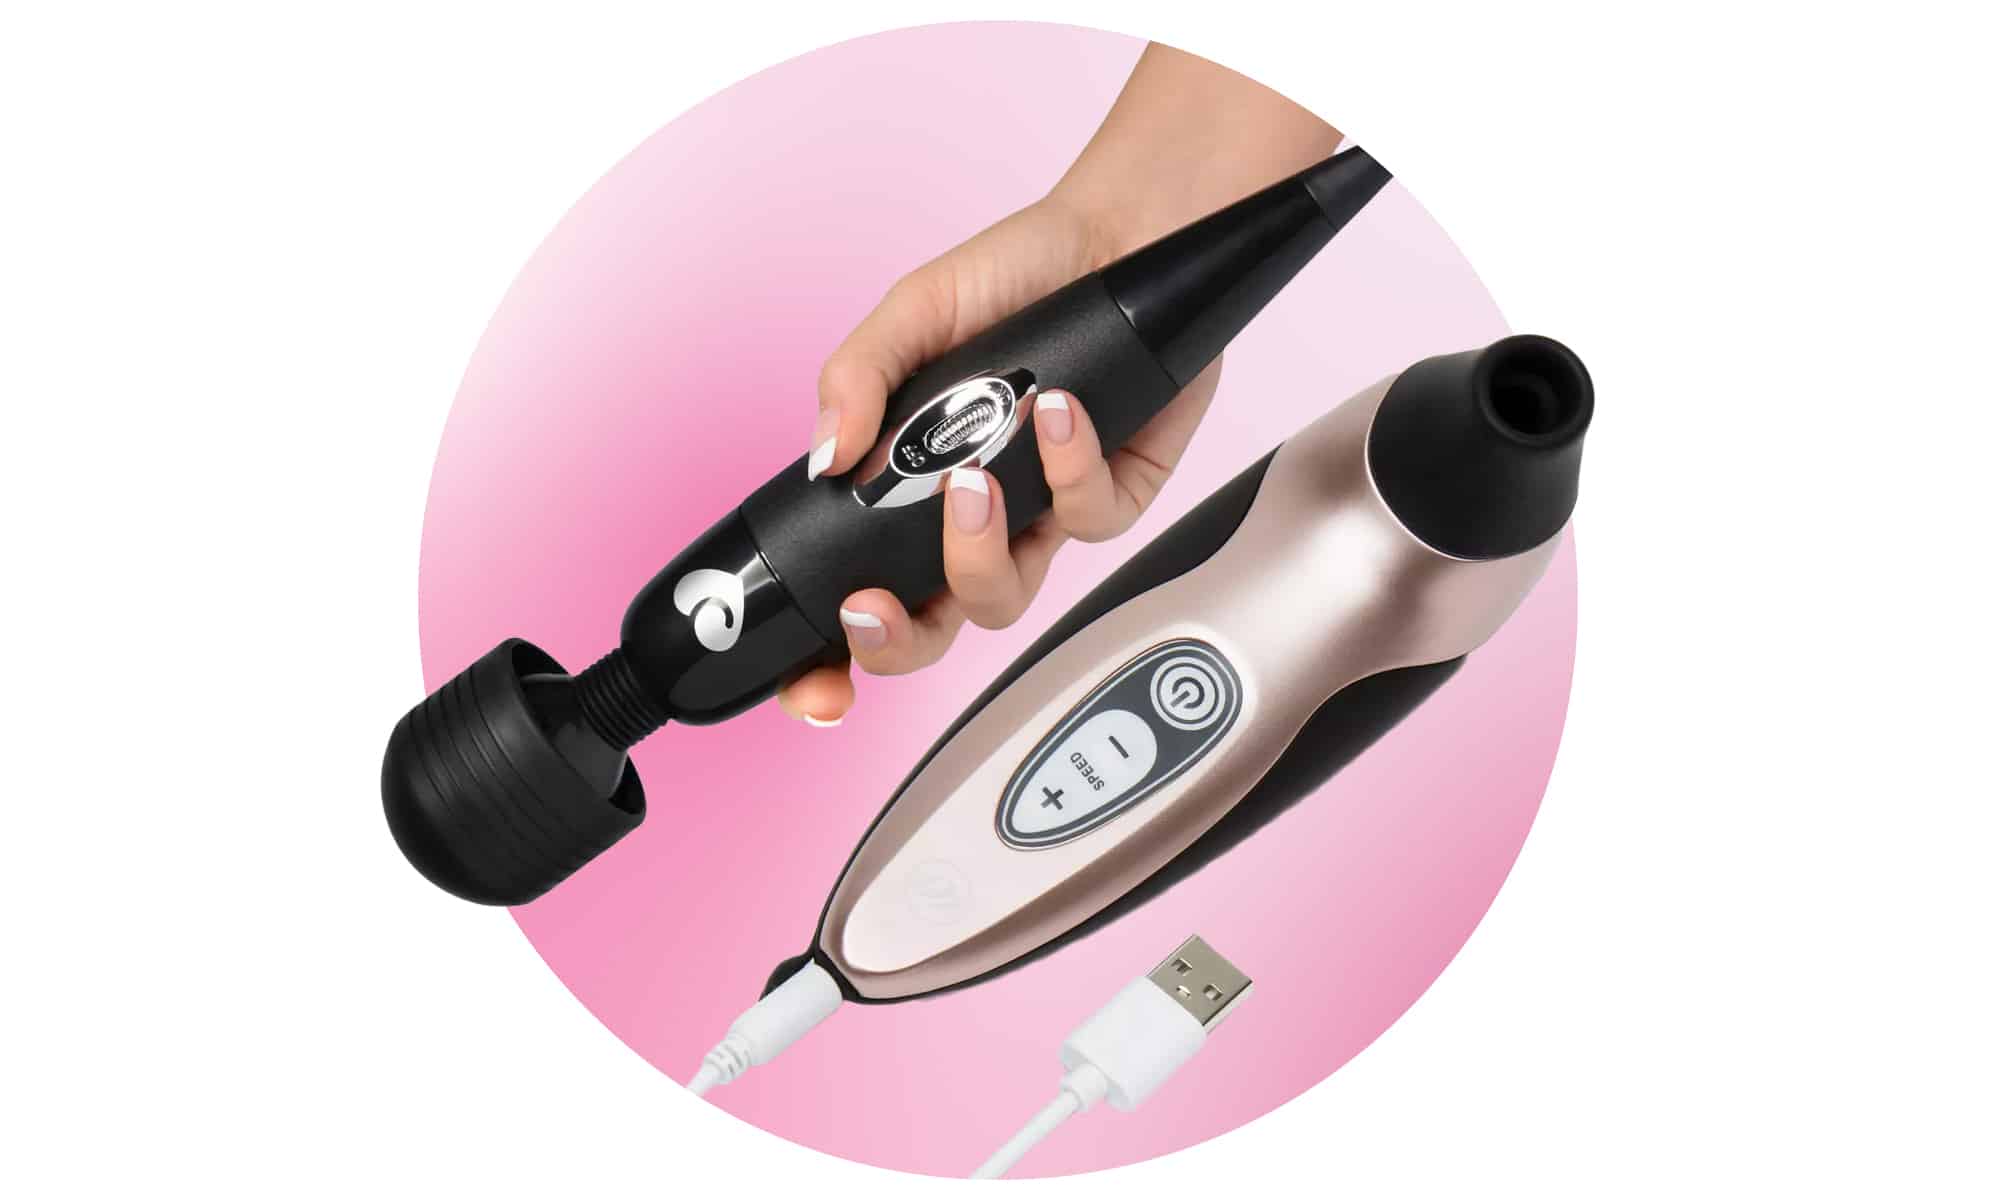 Some highlights in the Black Friday sale include discounts on the magic wand vibrator and clitoral stimulator.